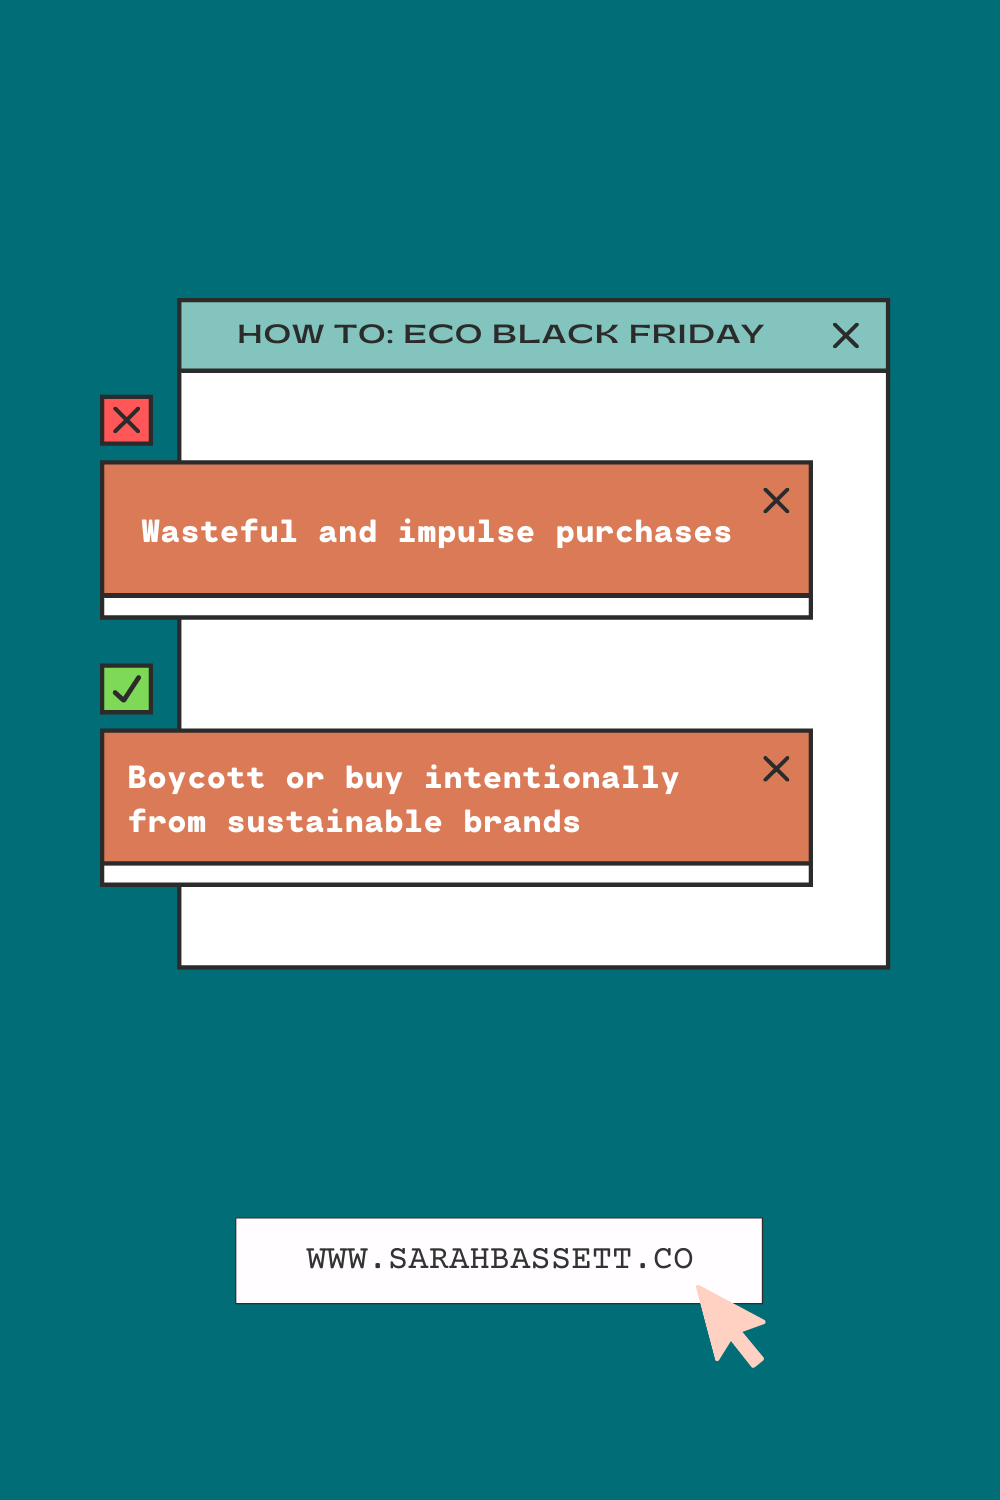 How to have an eco-friendly Black Friday and Cyber Monday by shopping with sustainable brands minimising their environmental impact